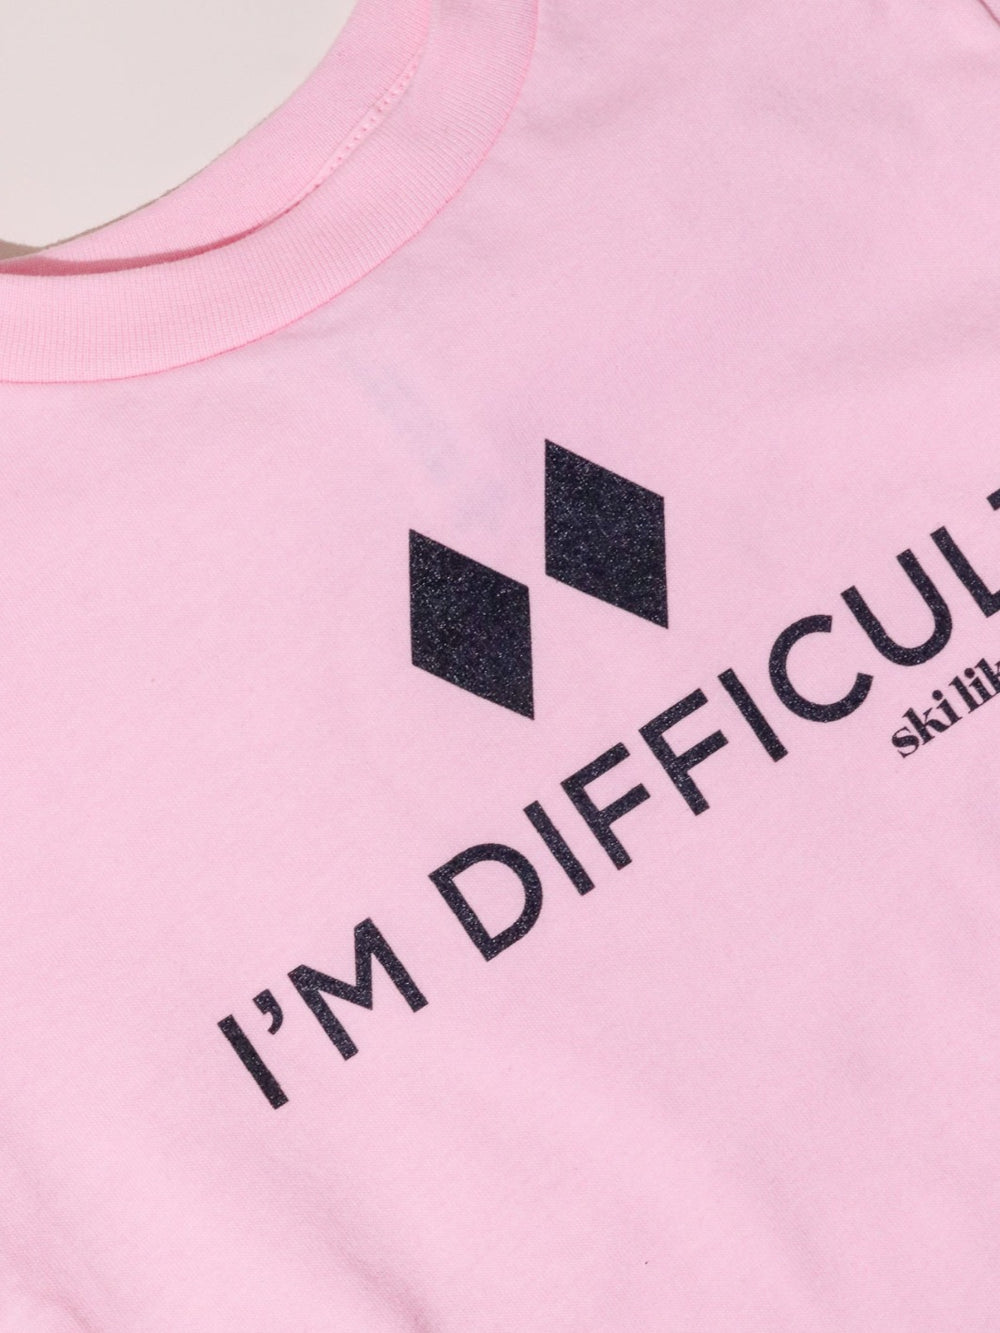 Ski Like a Girl I'm Difficult Toddler Tee - Heyday